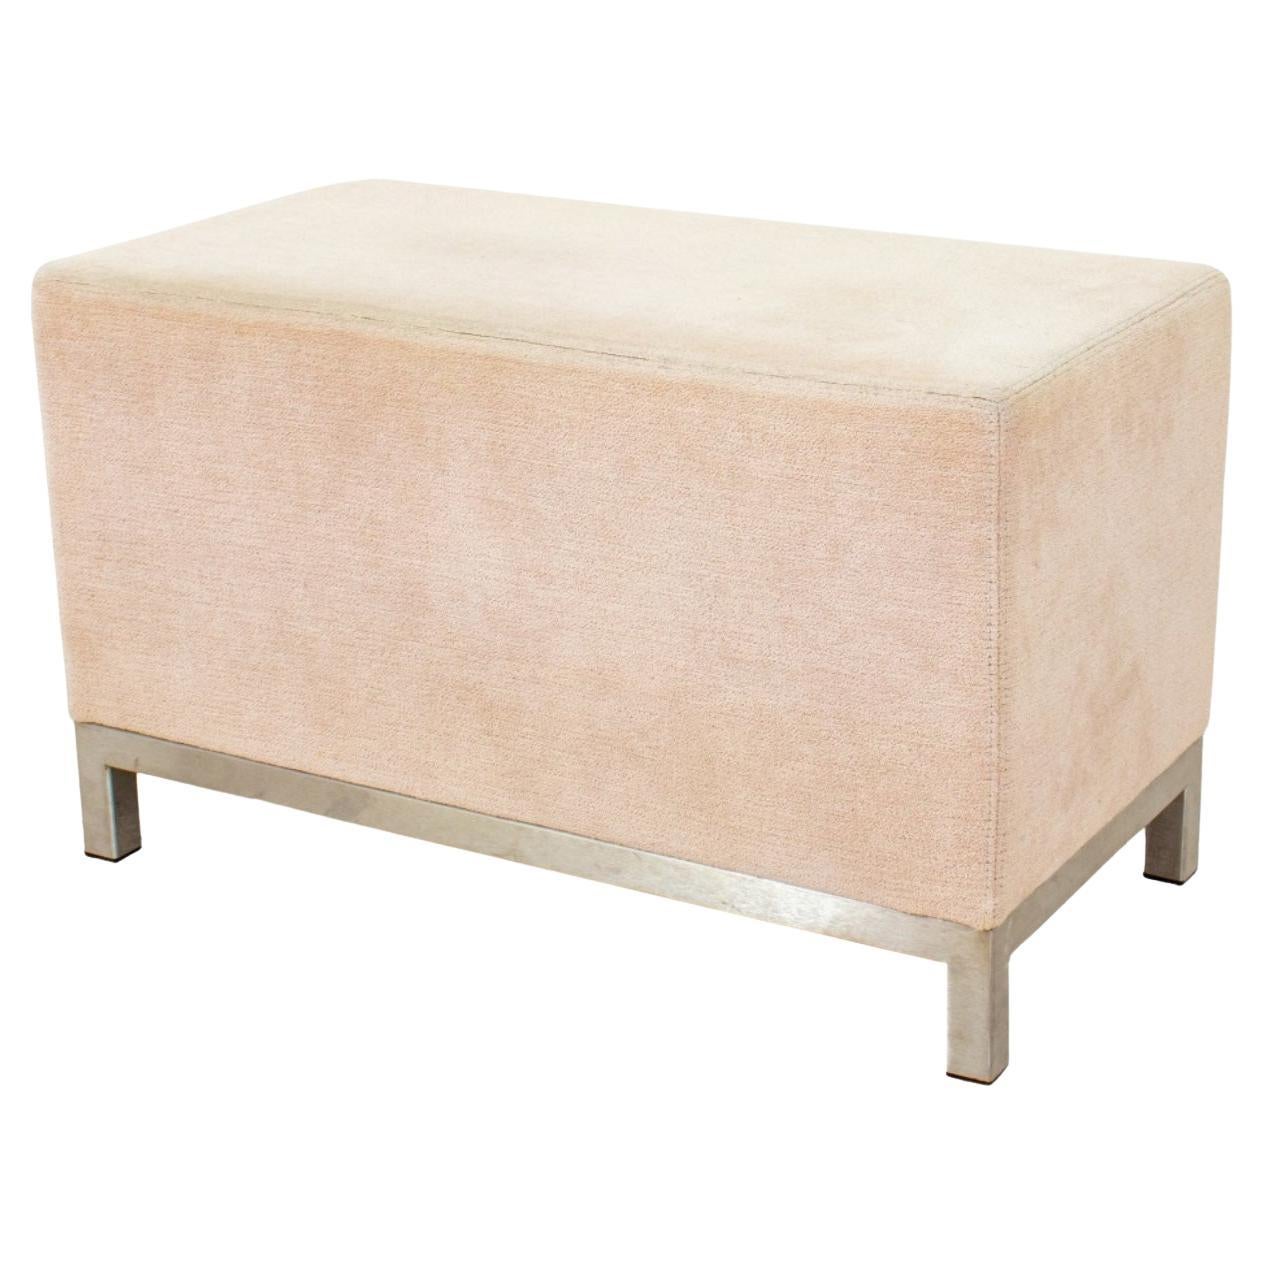 The Moderns Small Upholstered Ottoman blanc